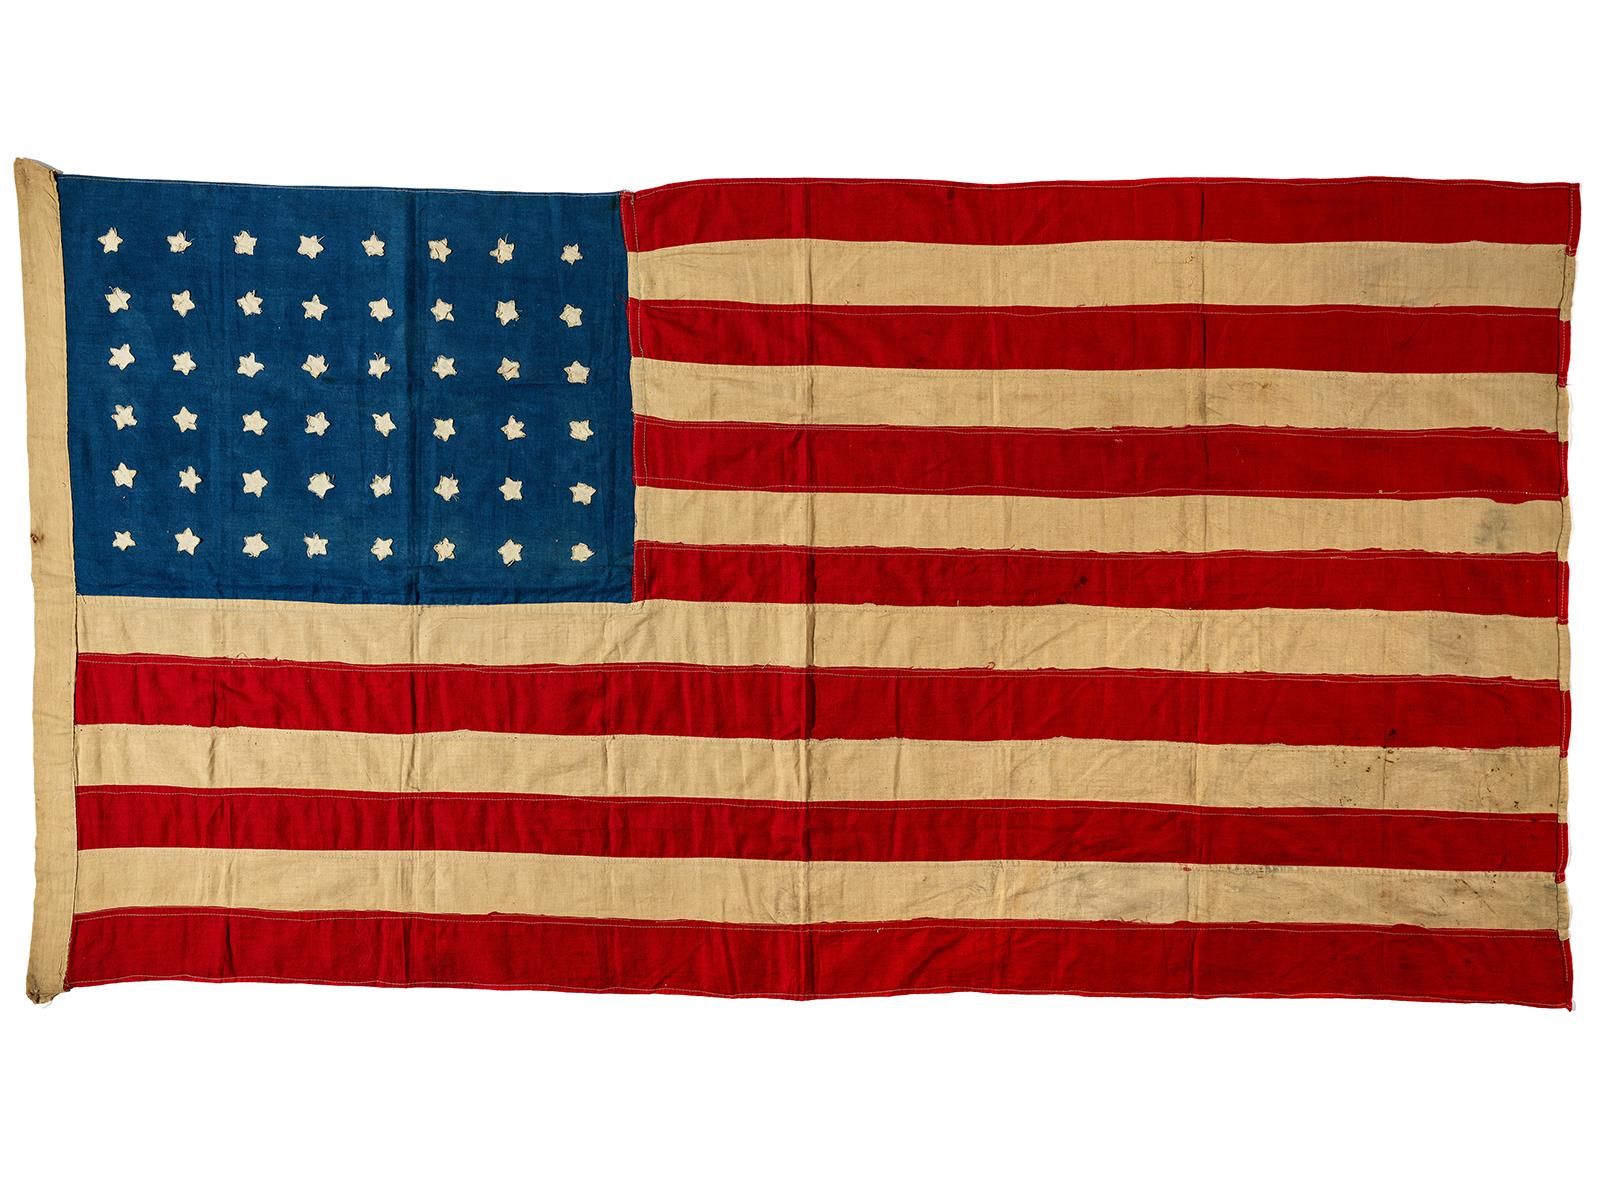 A Hundred-Year-Old Handmade American Flag Flies Home. . . to